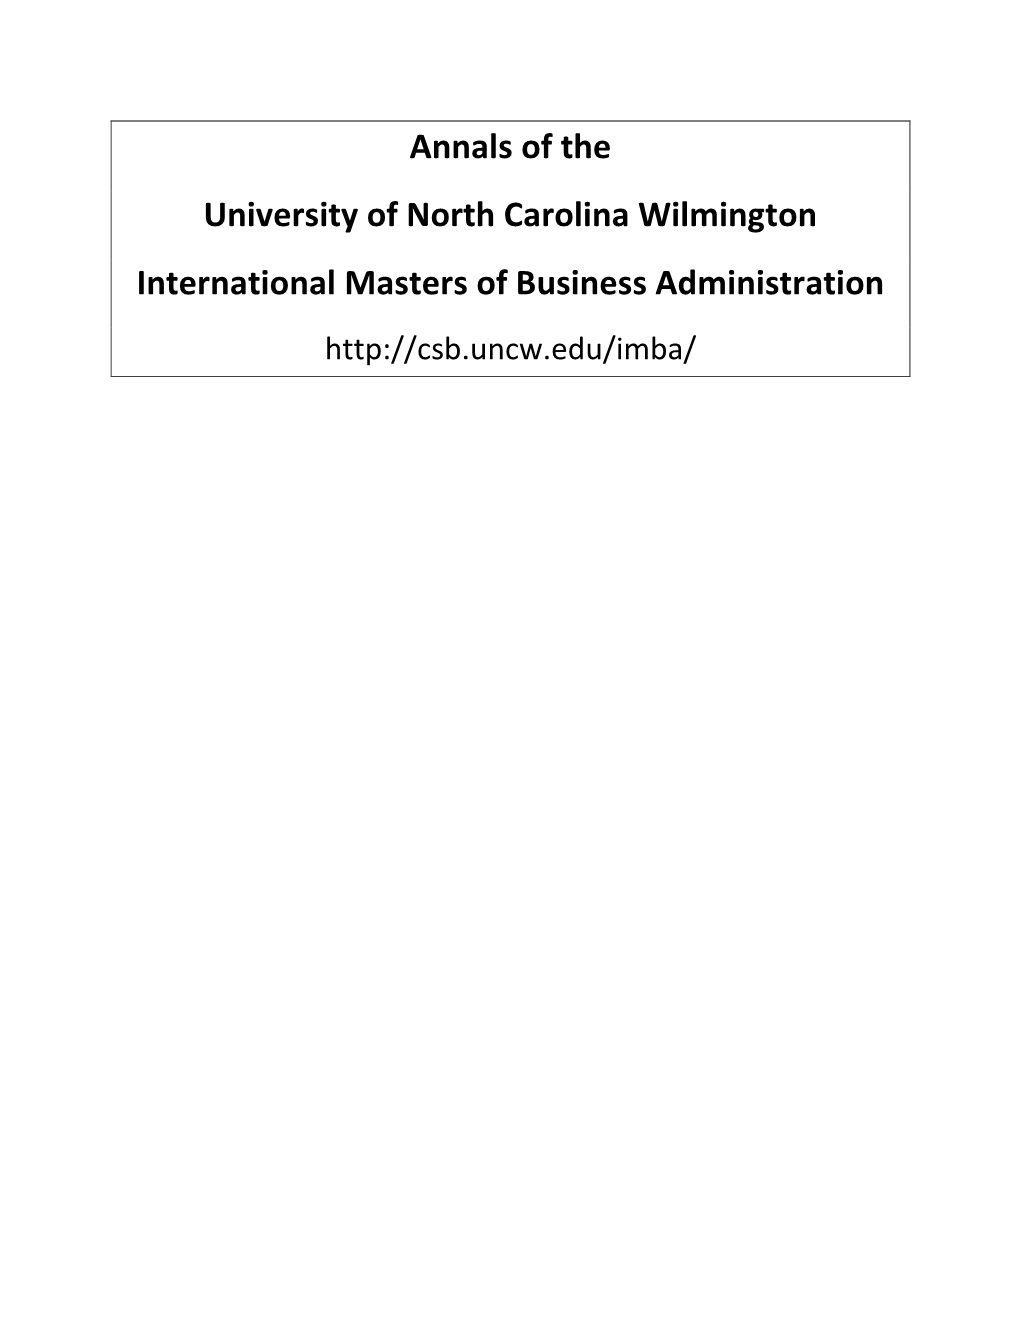 Annals of the University of North Carolina Wilmington International Masters of Business Administration